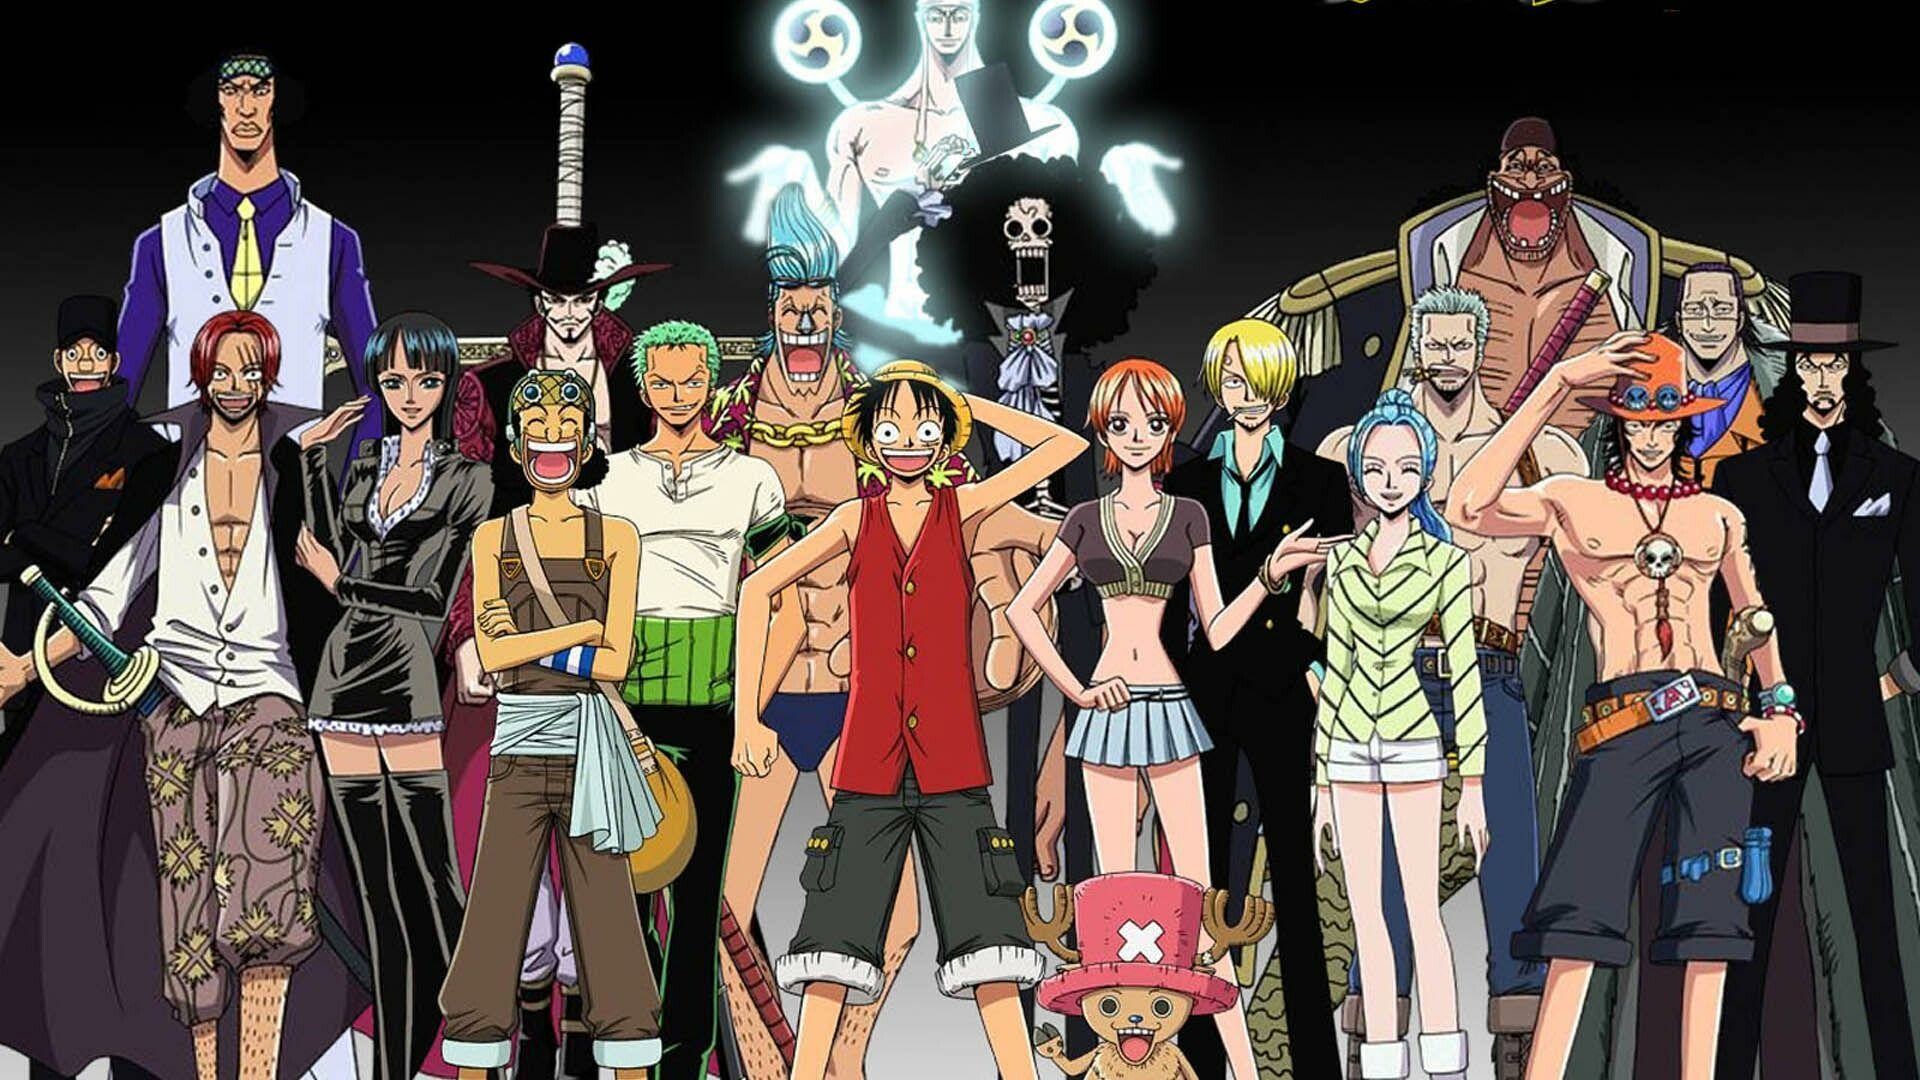 One Piece, HD wallpapers, Legendary crew, Action-packed series, 1920x1080 Full HD Desktop